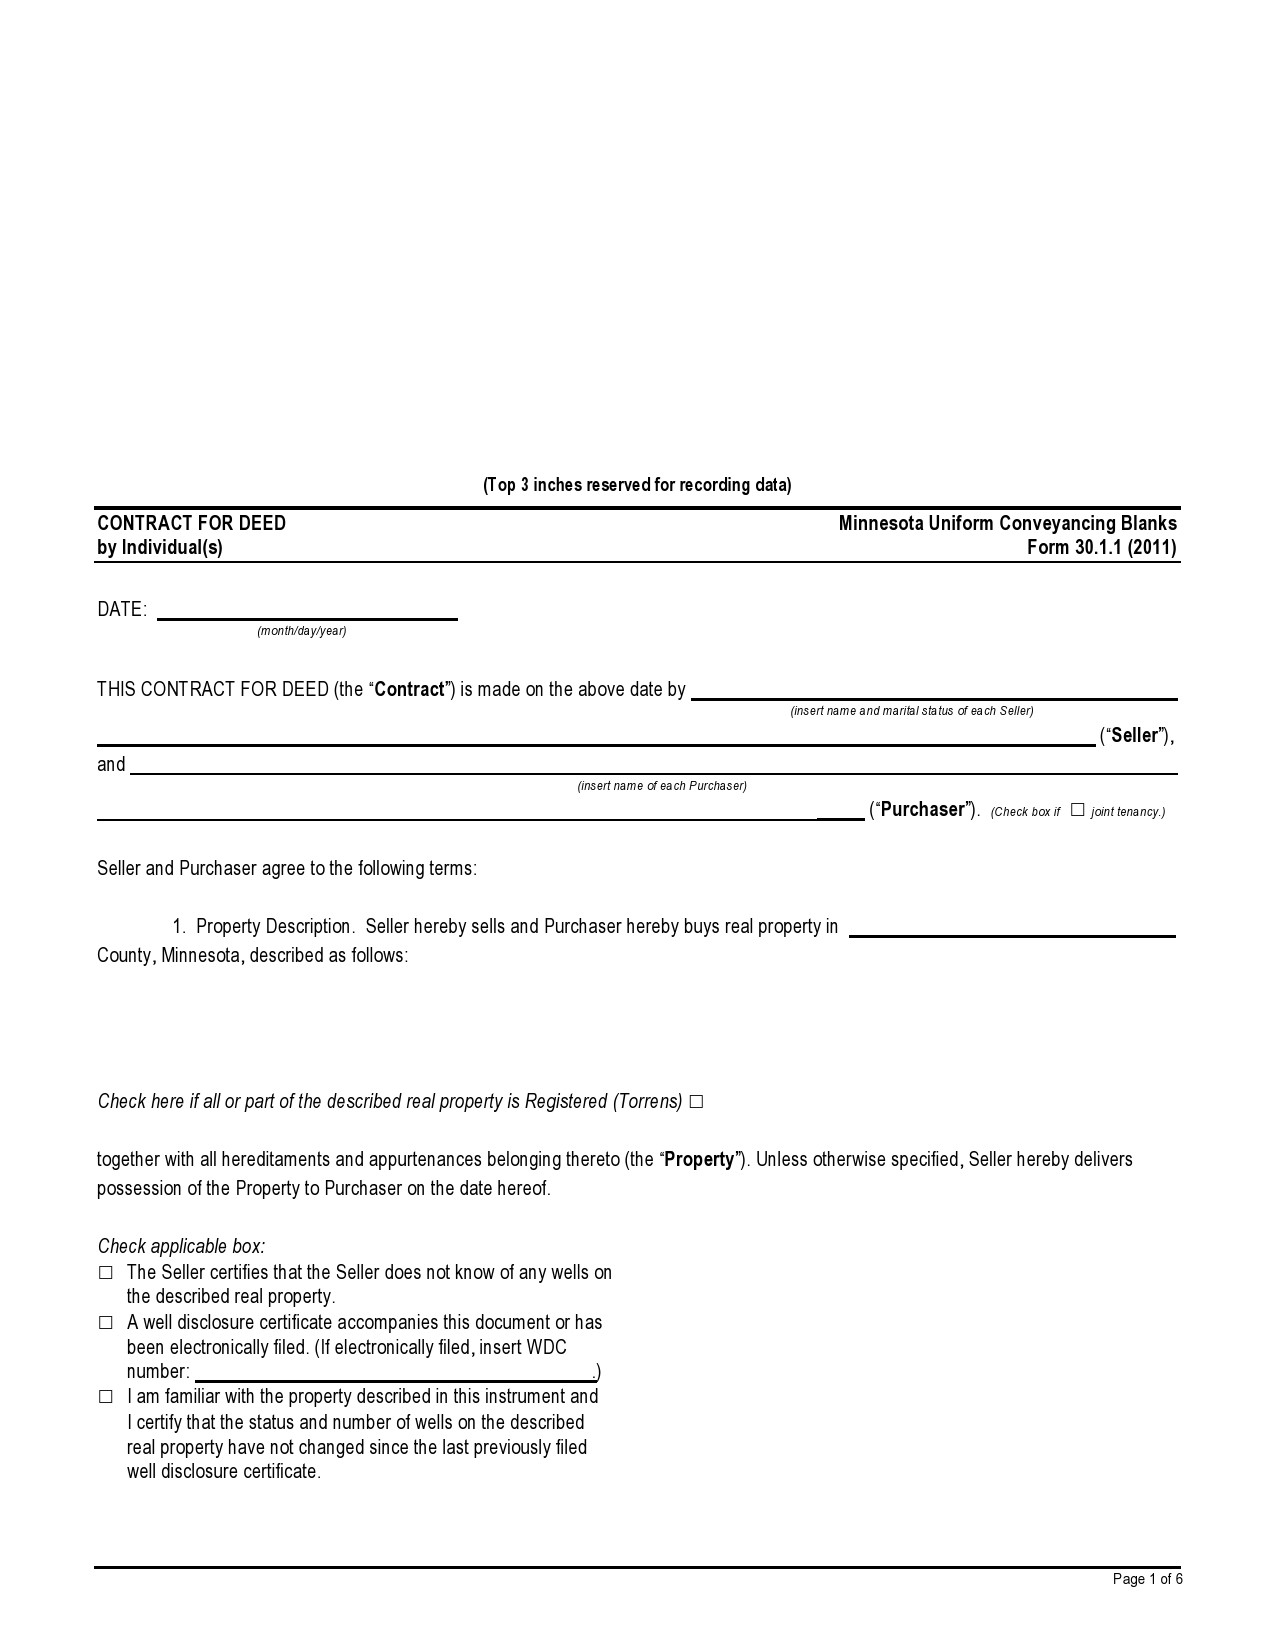 Free land contract form 45